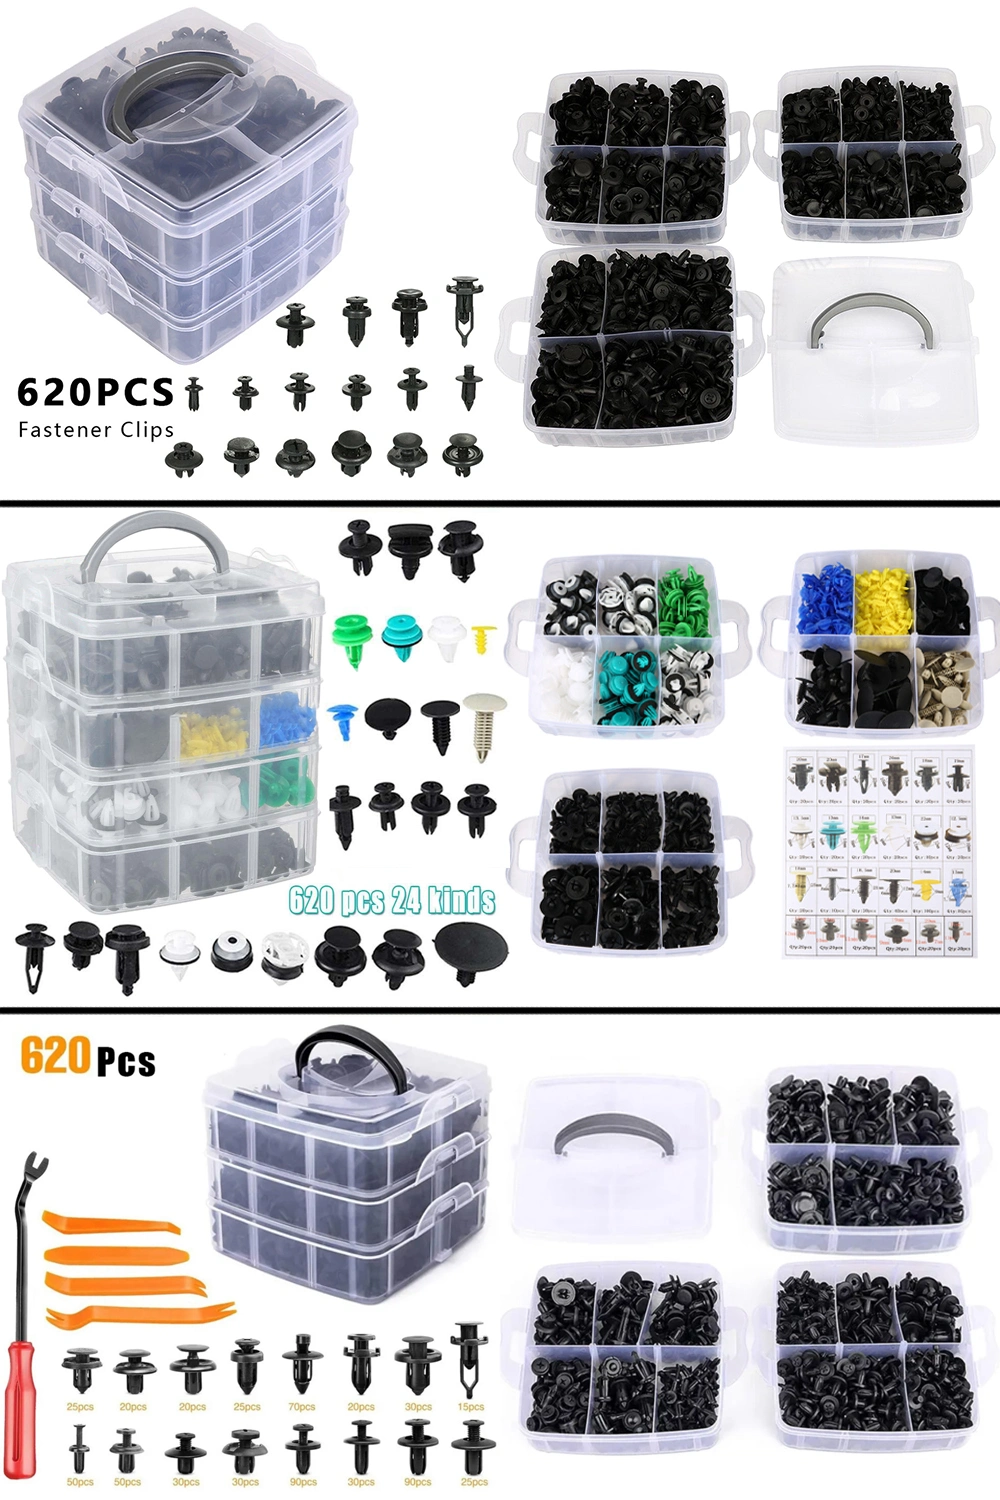 620 PCS Universal Auto Retainer Clips Fasteners Kit - Plastic Push Pins Rivets Set with Removal Tool - 16 Most Popular Sizes Compatible